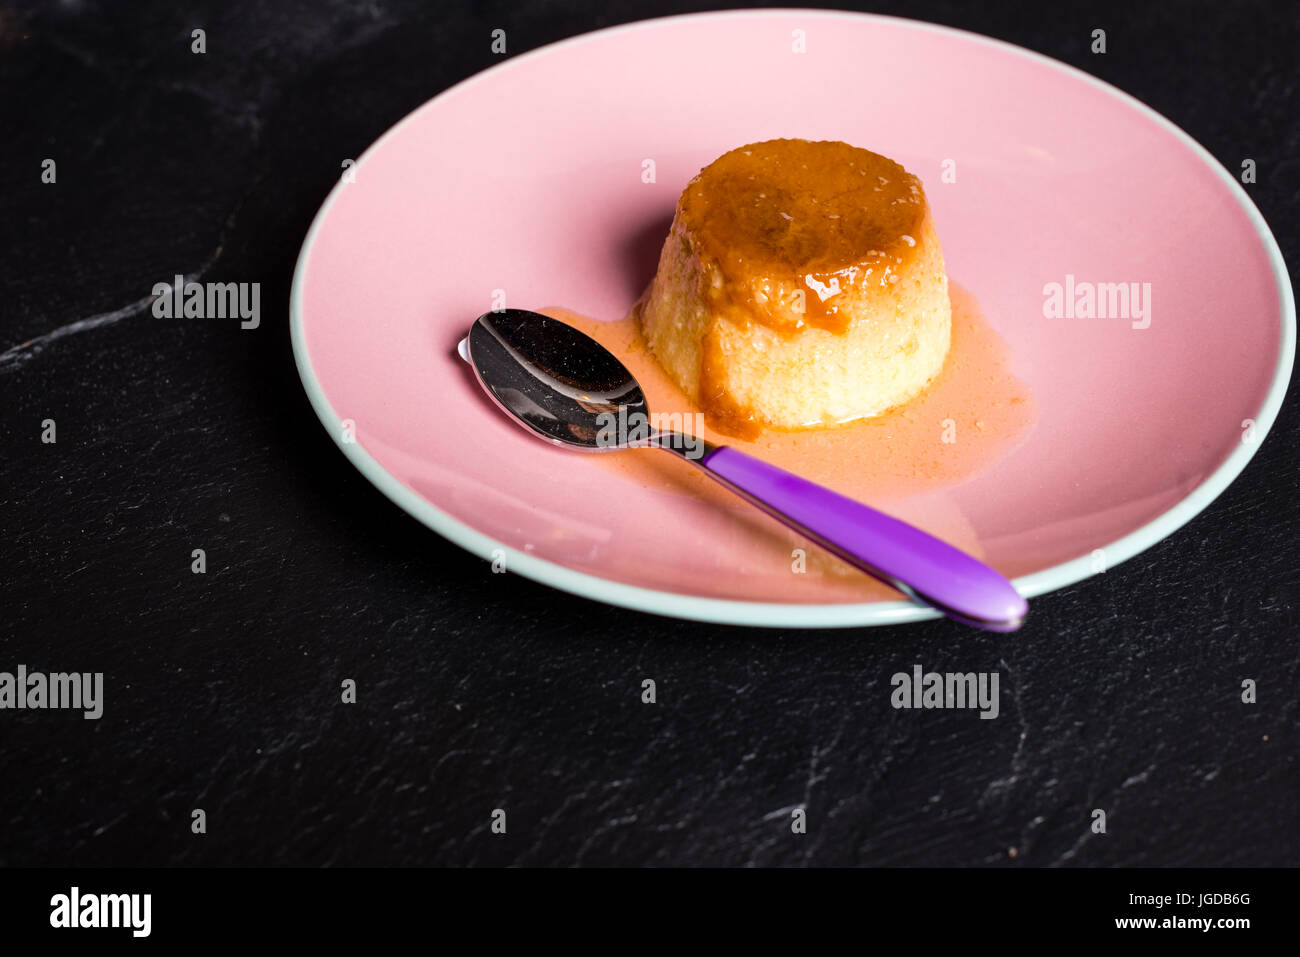 Flan - a sweet custard creme caramel with creme on top, on a pink plate over a wooden board. Stock Photo